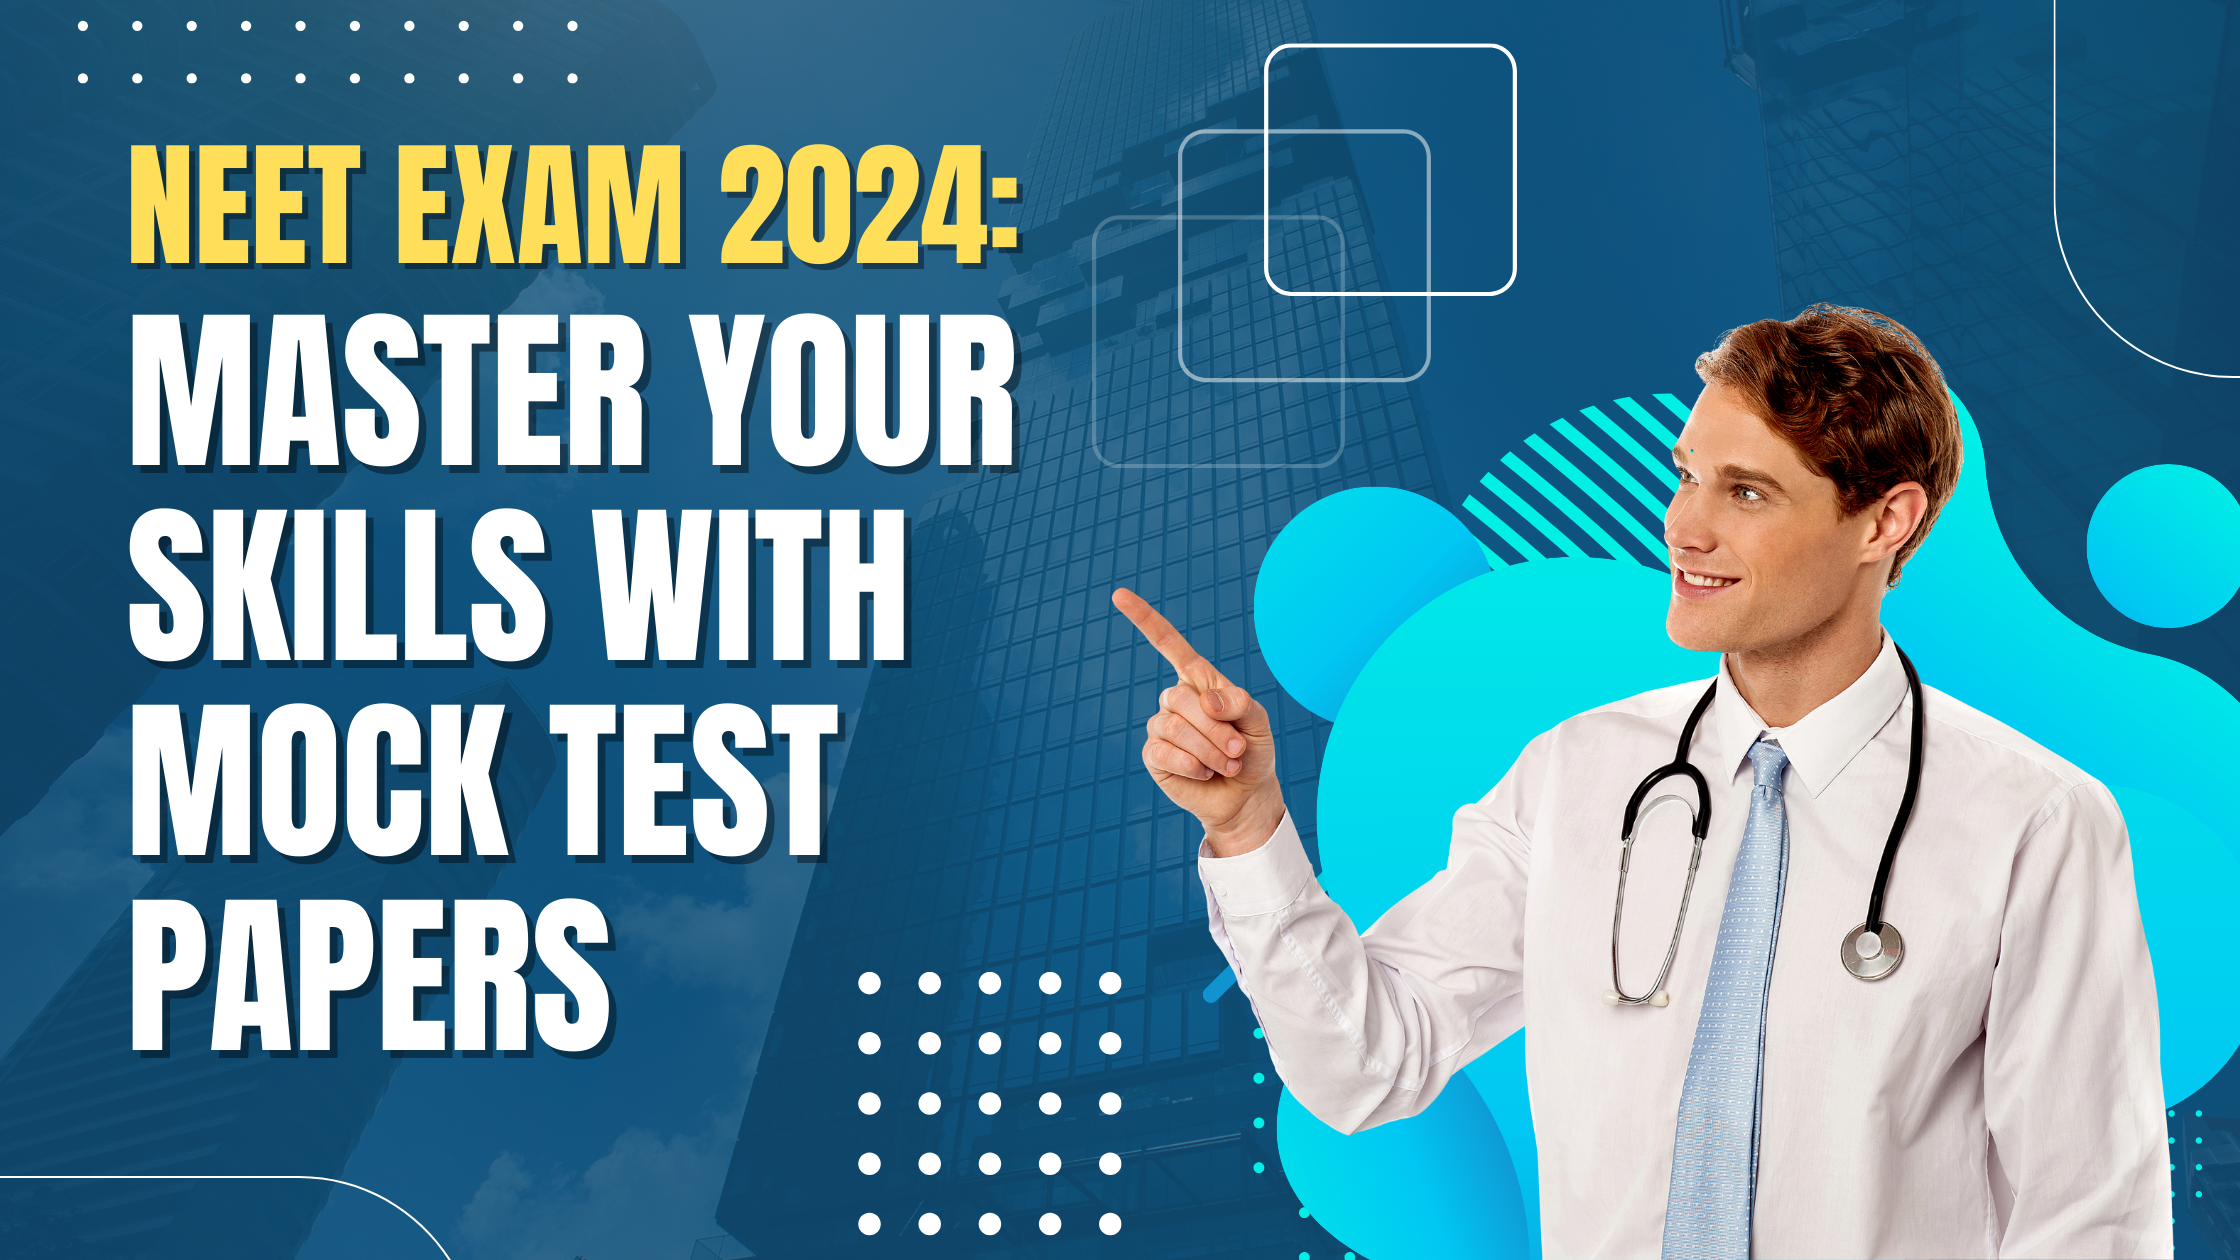 NEET Exam 2024: Master Your Skills with Mock Test Papers